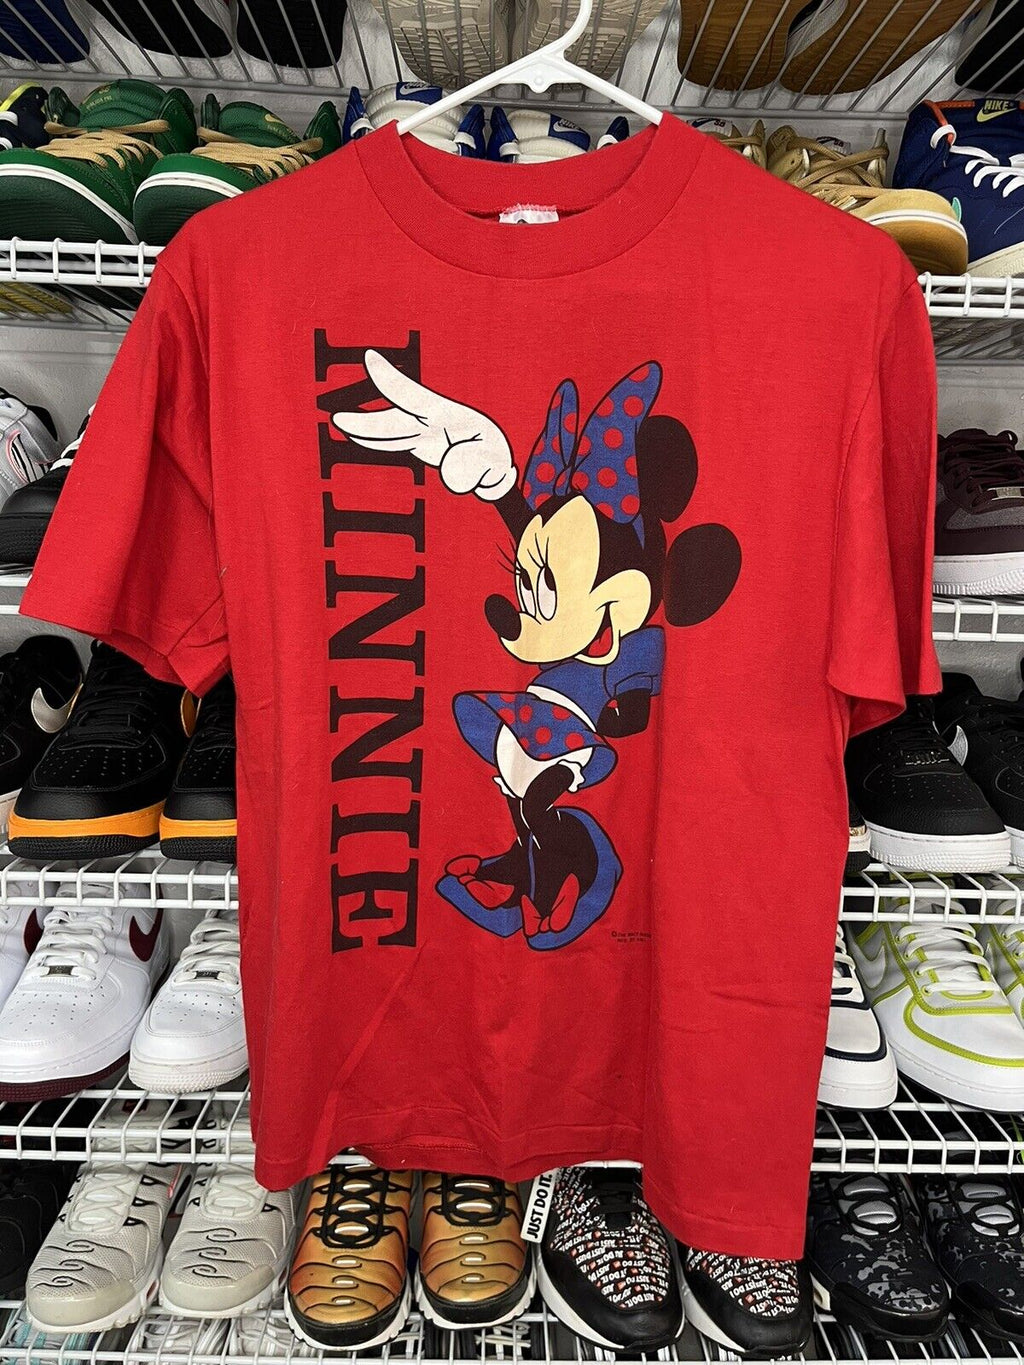 Rare Vintage 80s 90s Disney Minnie Mouse T Shirt Red Large - Hype Stew Sneakers Detroit